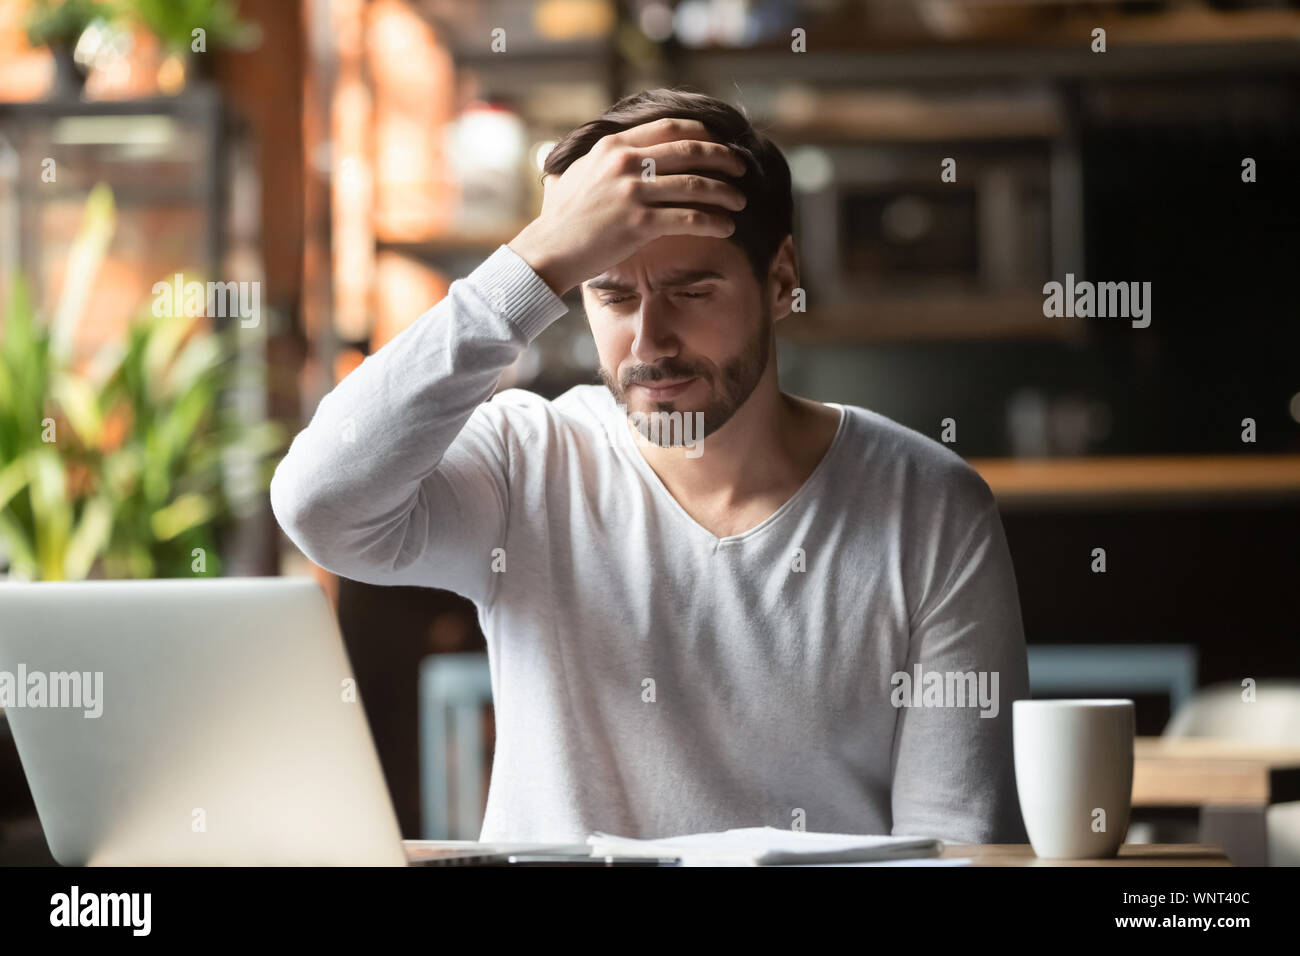 Upset man working in cafe, suffering from headache, touching forehead Stock Photo